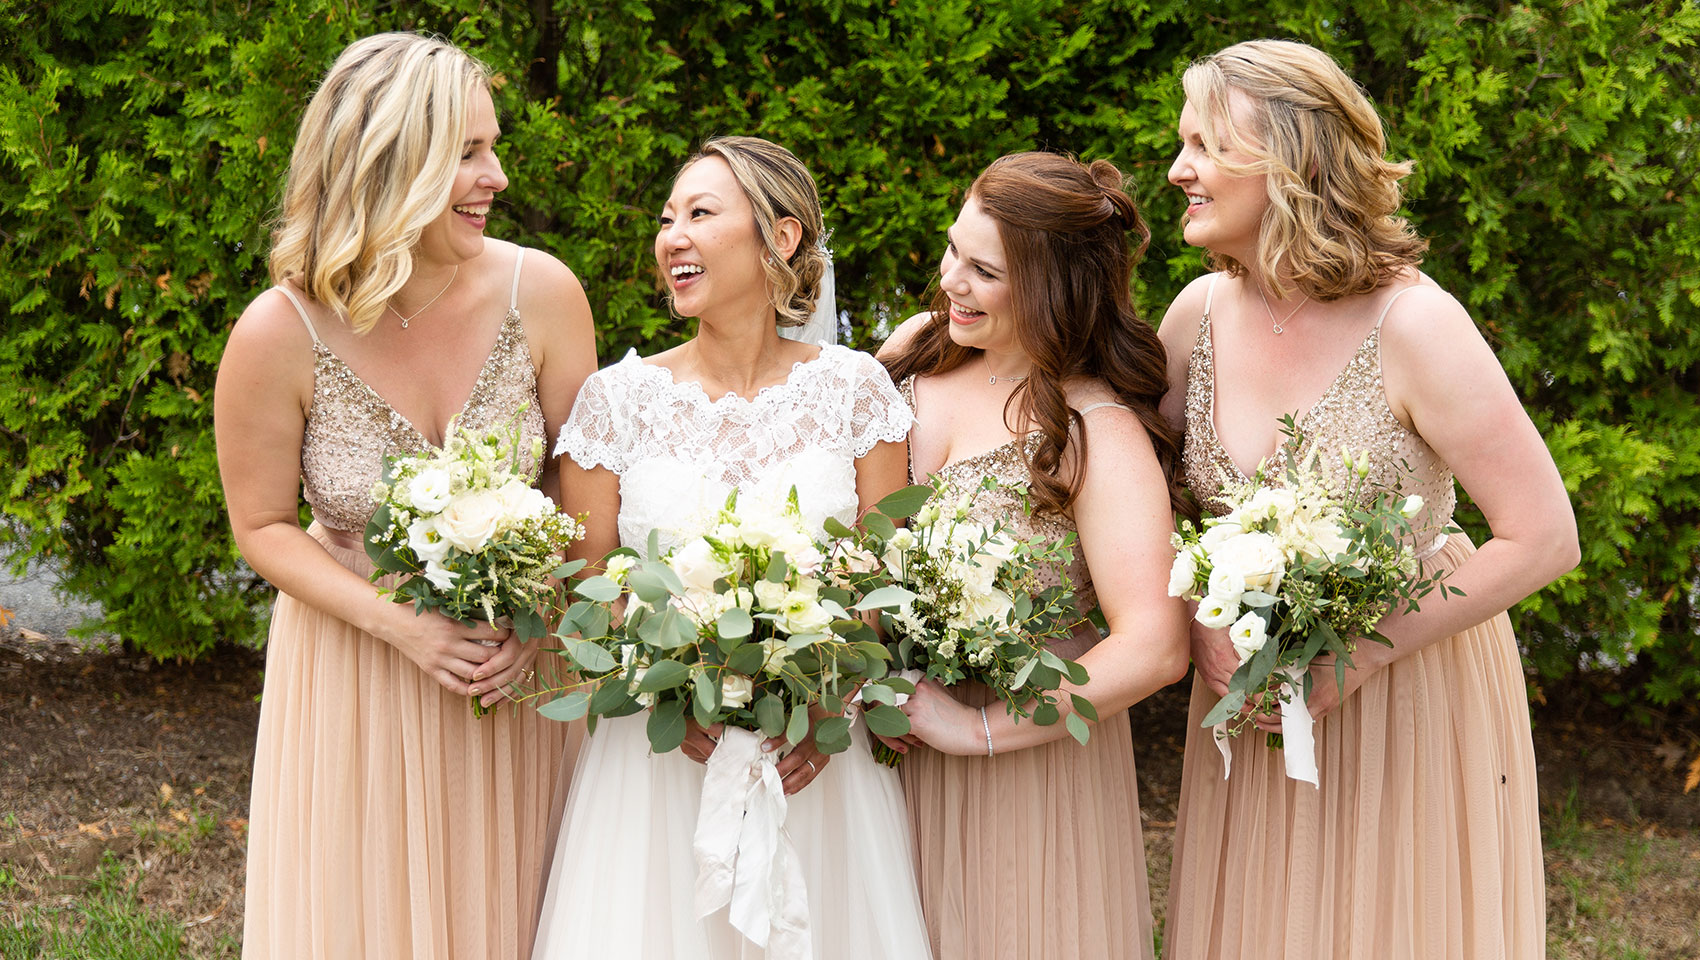 Bride and bridesmaids laughing while holding bouquets 